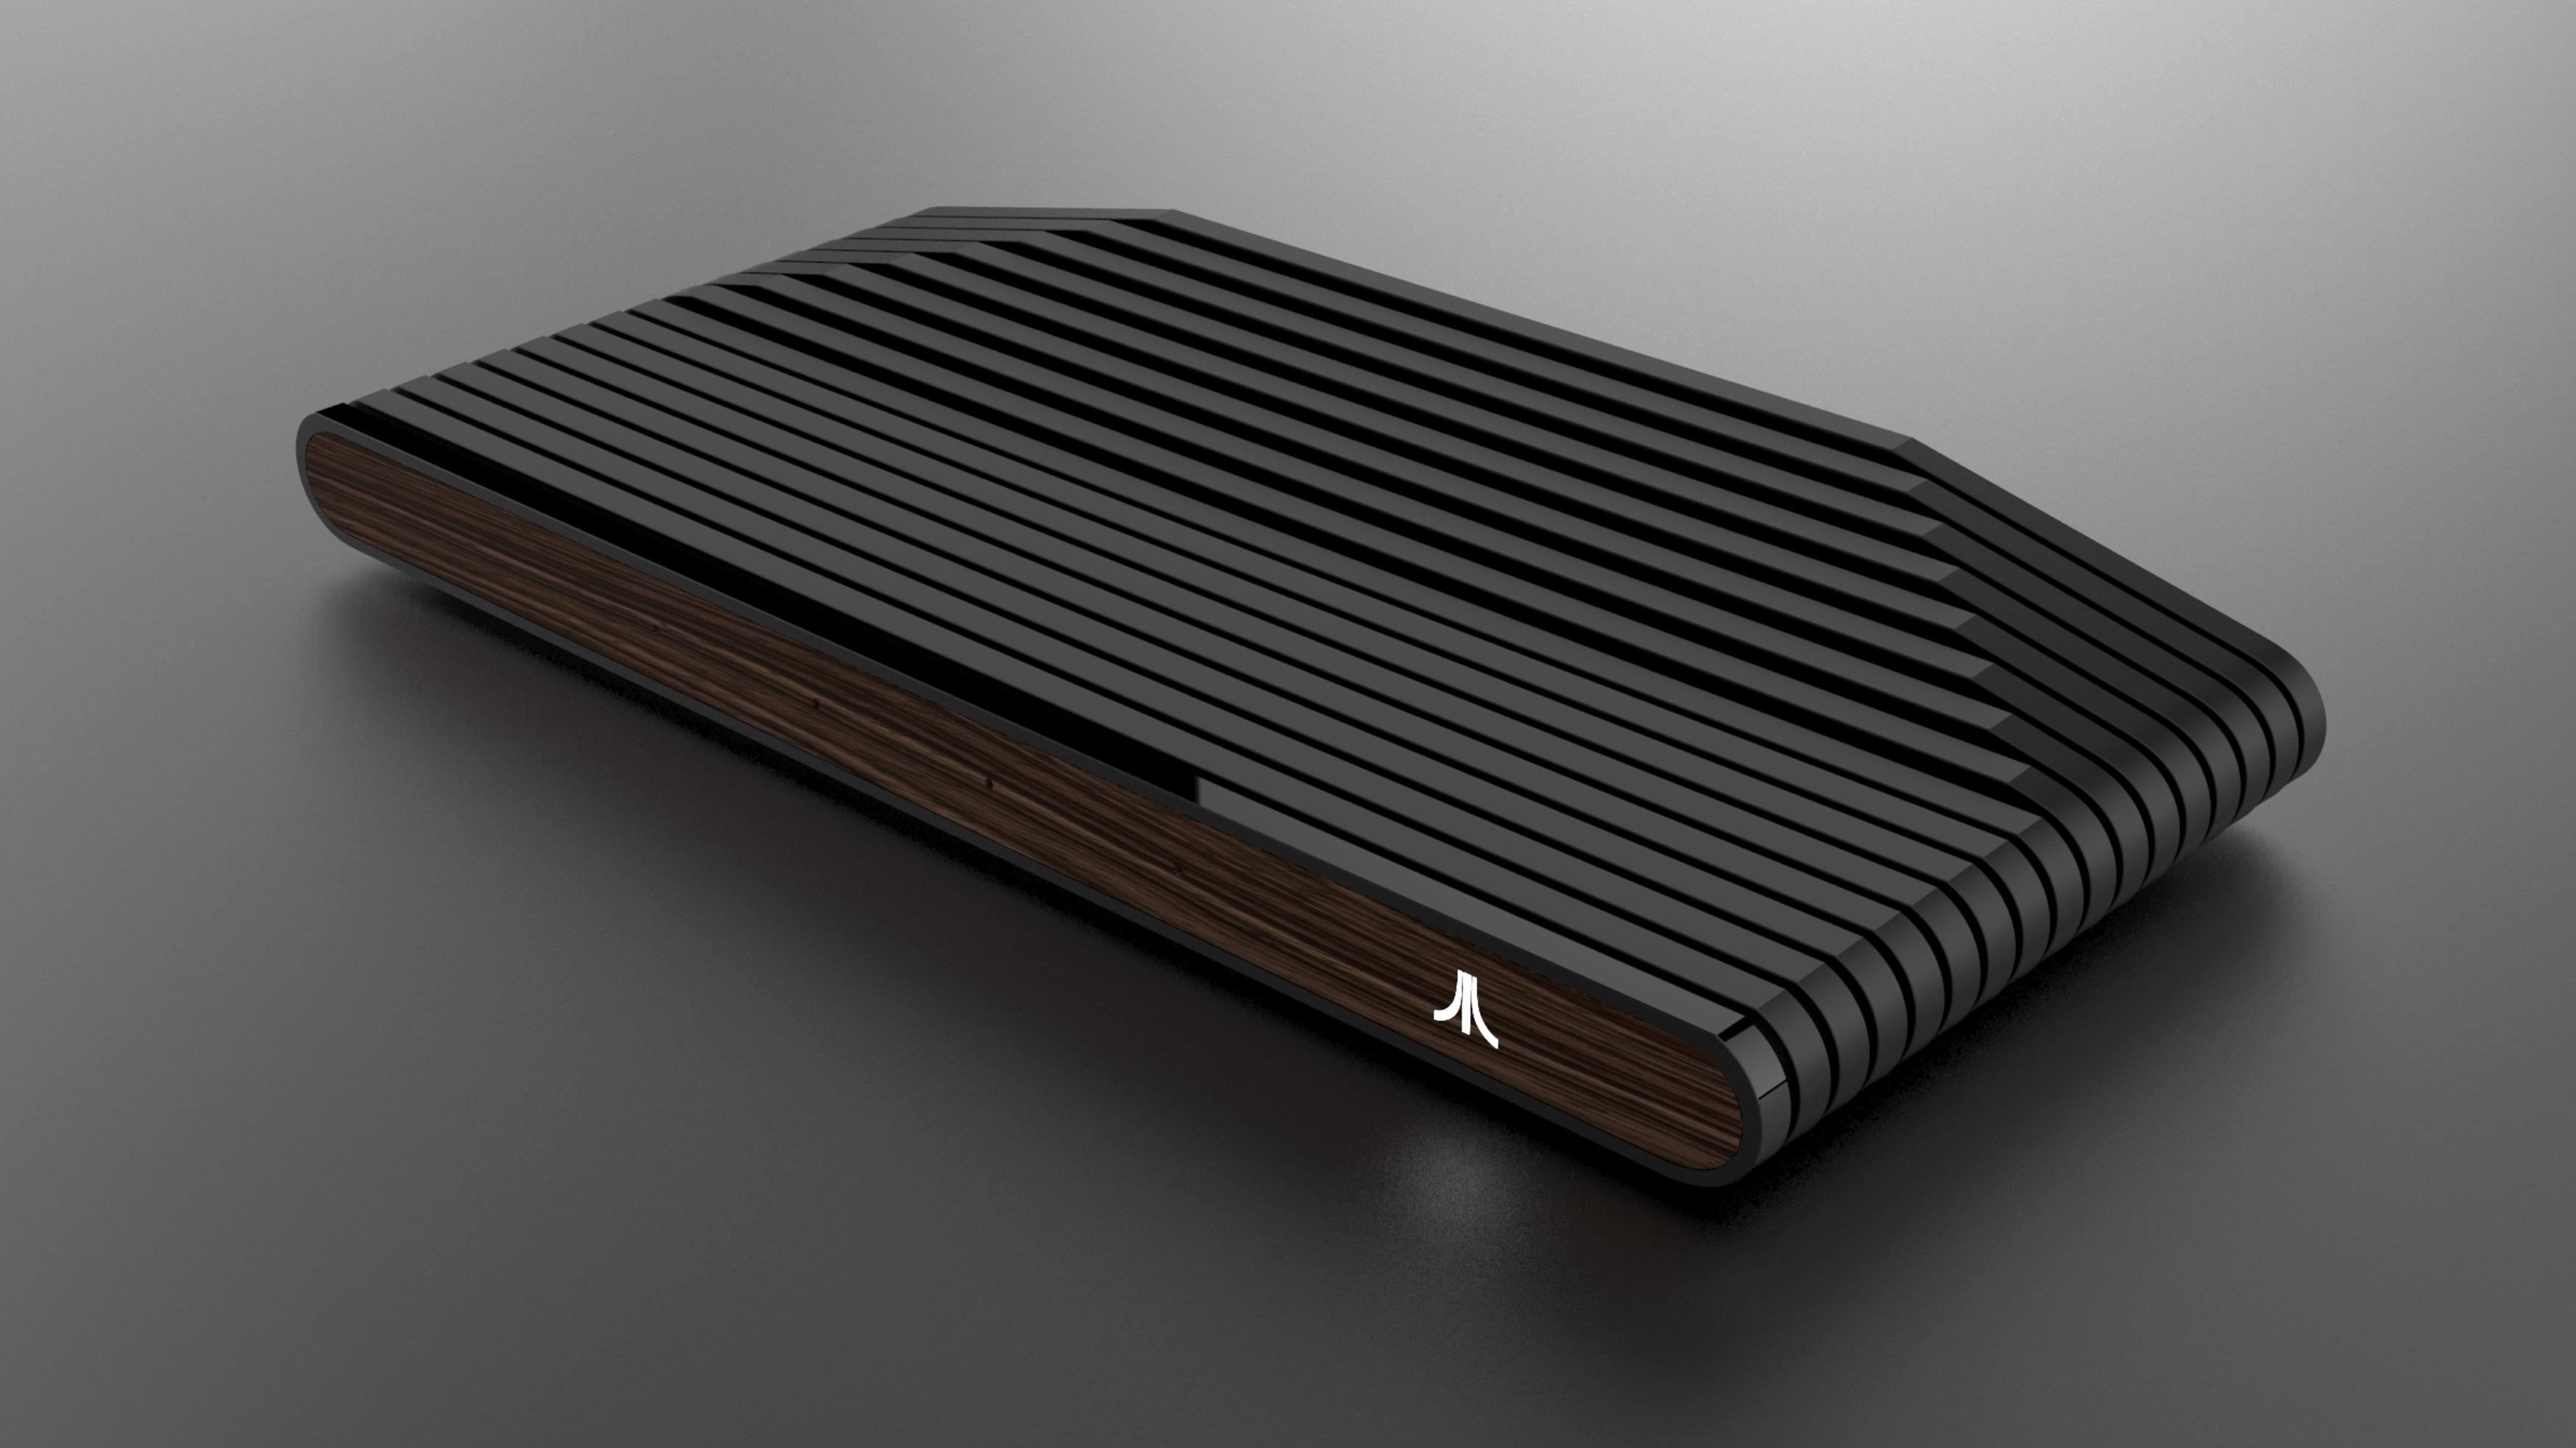 Our first look at the upcoming Atari ‘Ataribox’ video game console